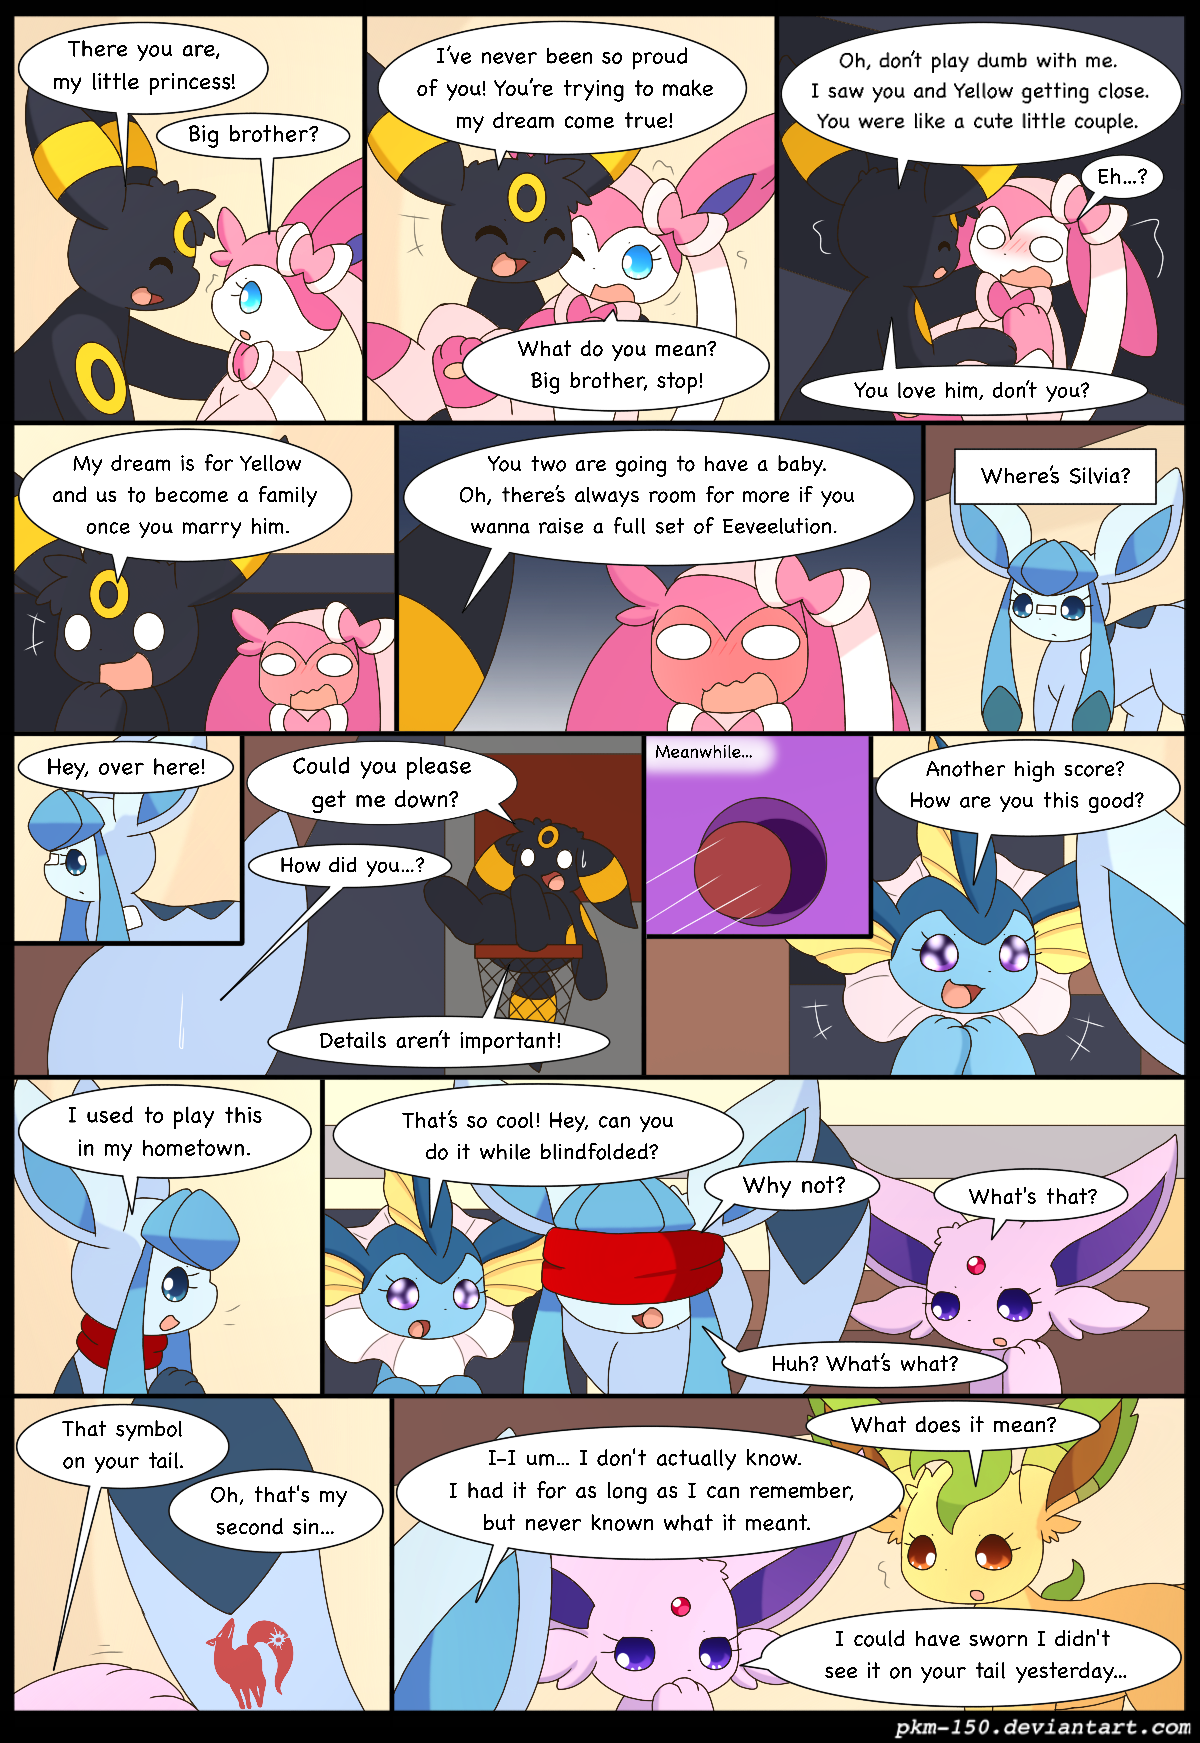 Es Special Chapter 10 Page 53 By Pkm 150 On Deviantart